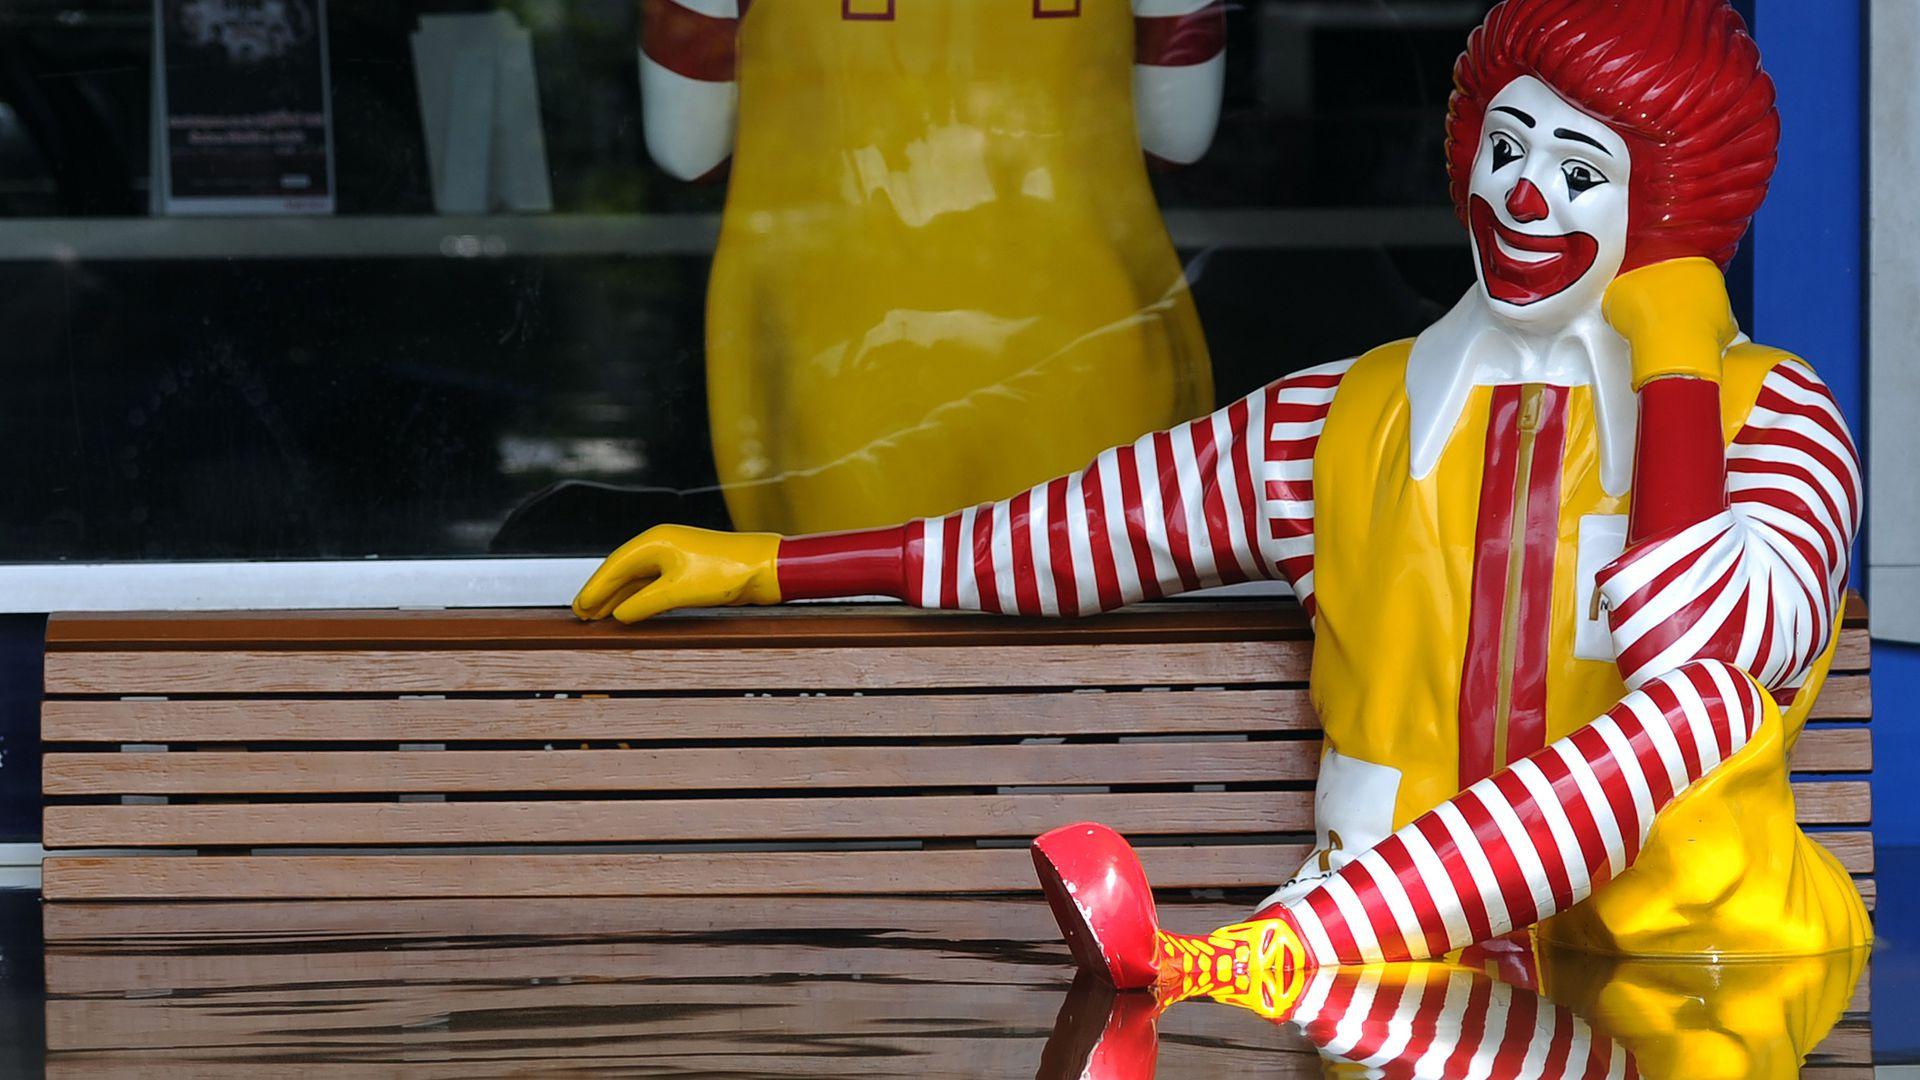 Do you want to cut carbon with that? McDonald's sets climate target